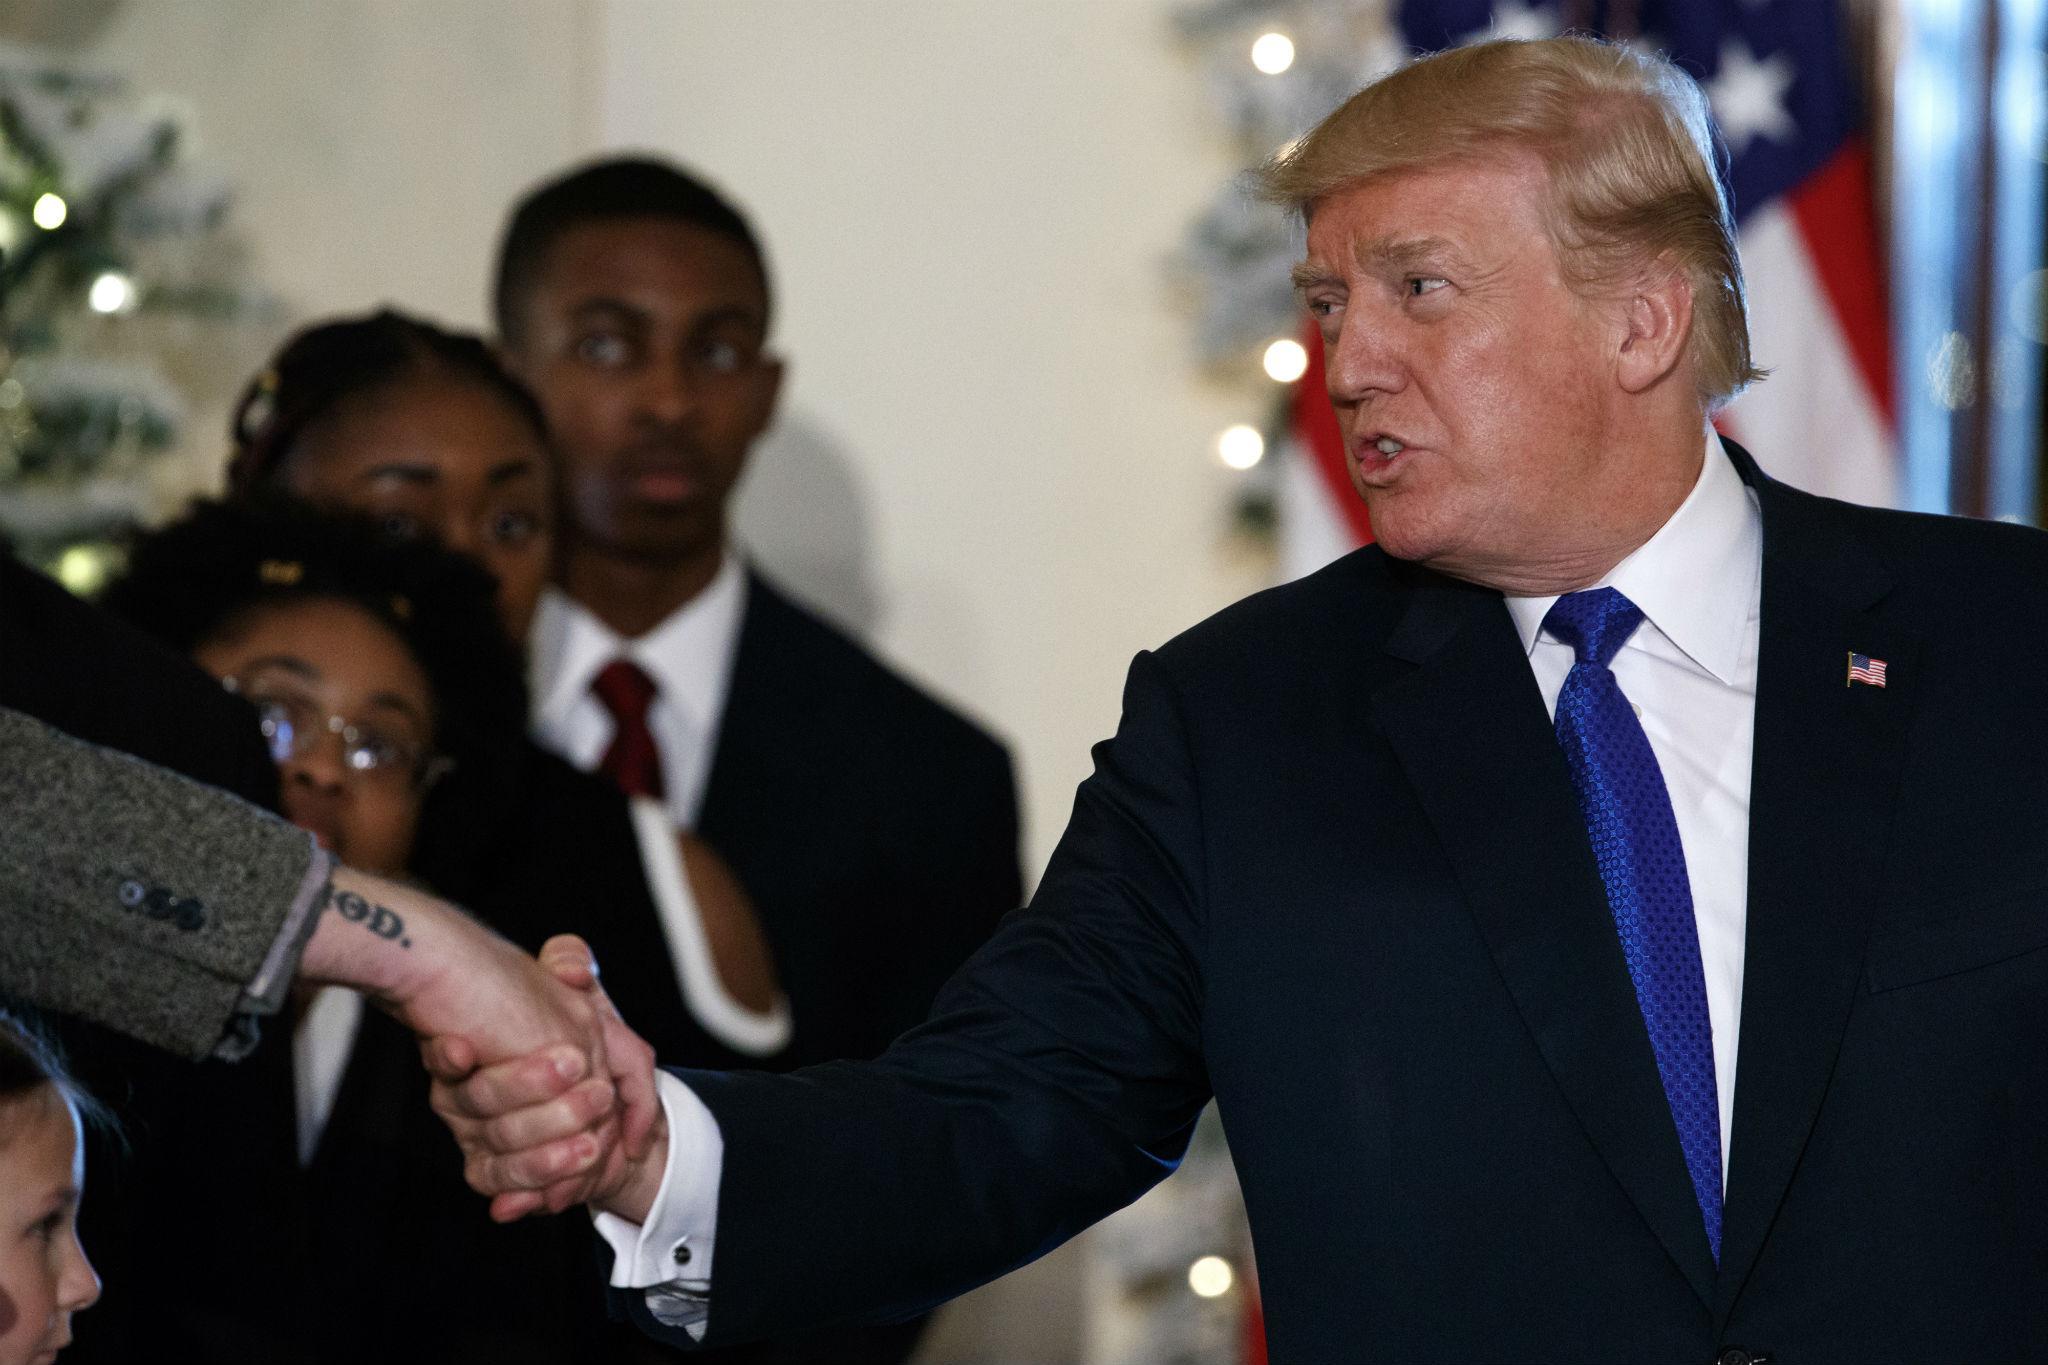 President Donald Trump shakes hands after speaking on tax reform in the Grand Foyer of the White House, Wednesday, Dec. 13, 2017, in Washington.